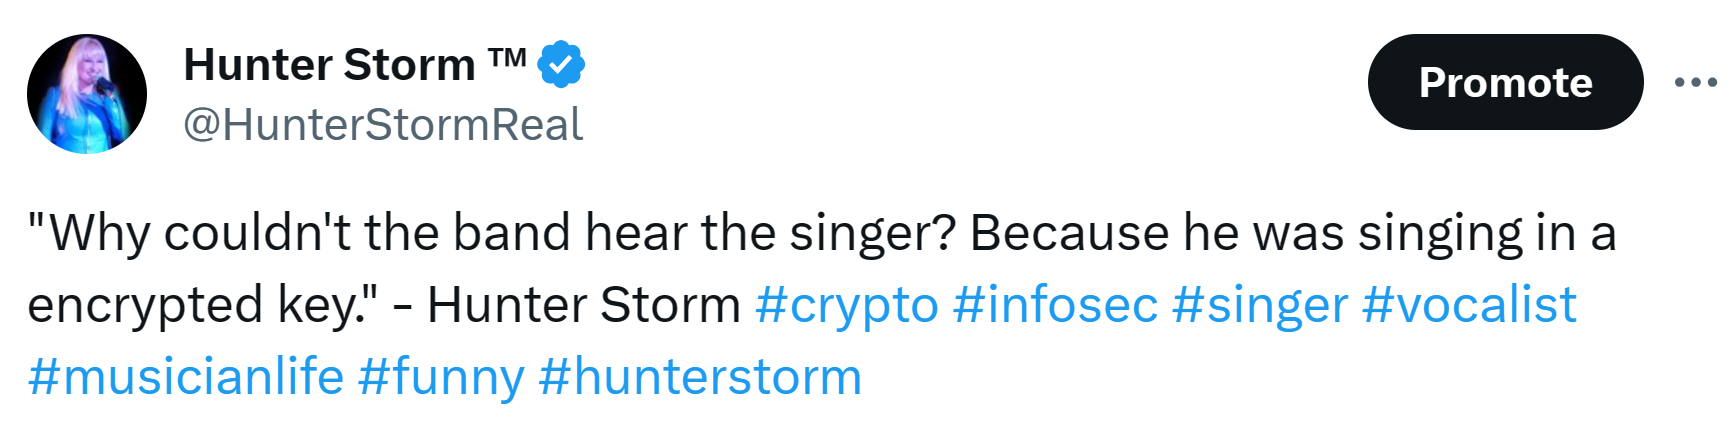 Hunter Storm Wisdom: Timeless Insights and Inspiration | "Why couldn't the band hear the singer? Because he was singing in an encrypted key."